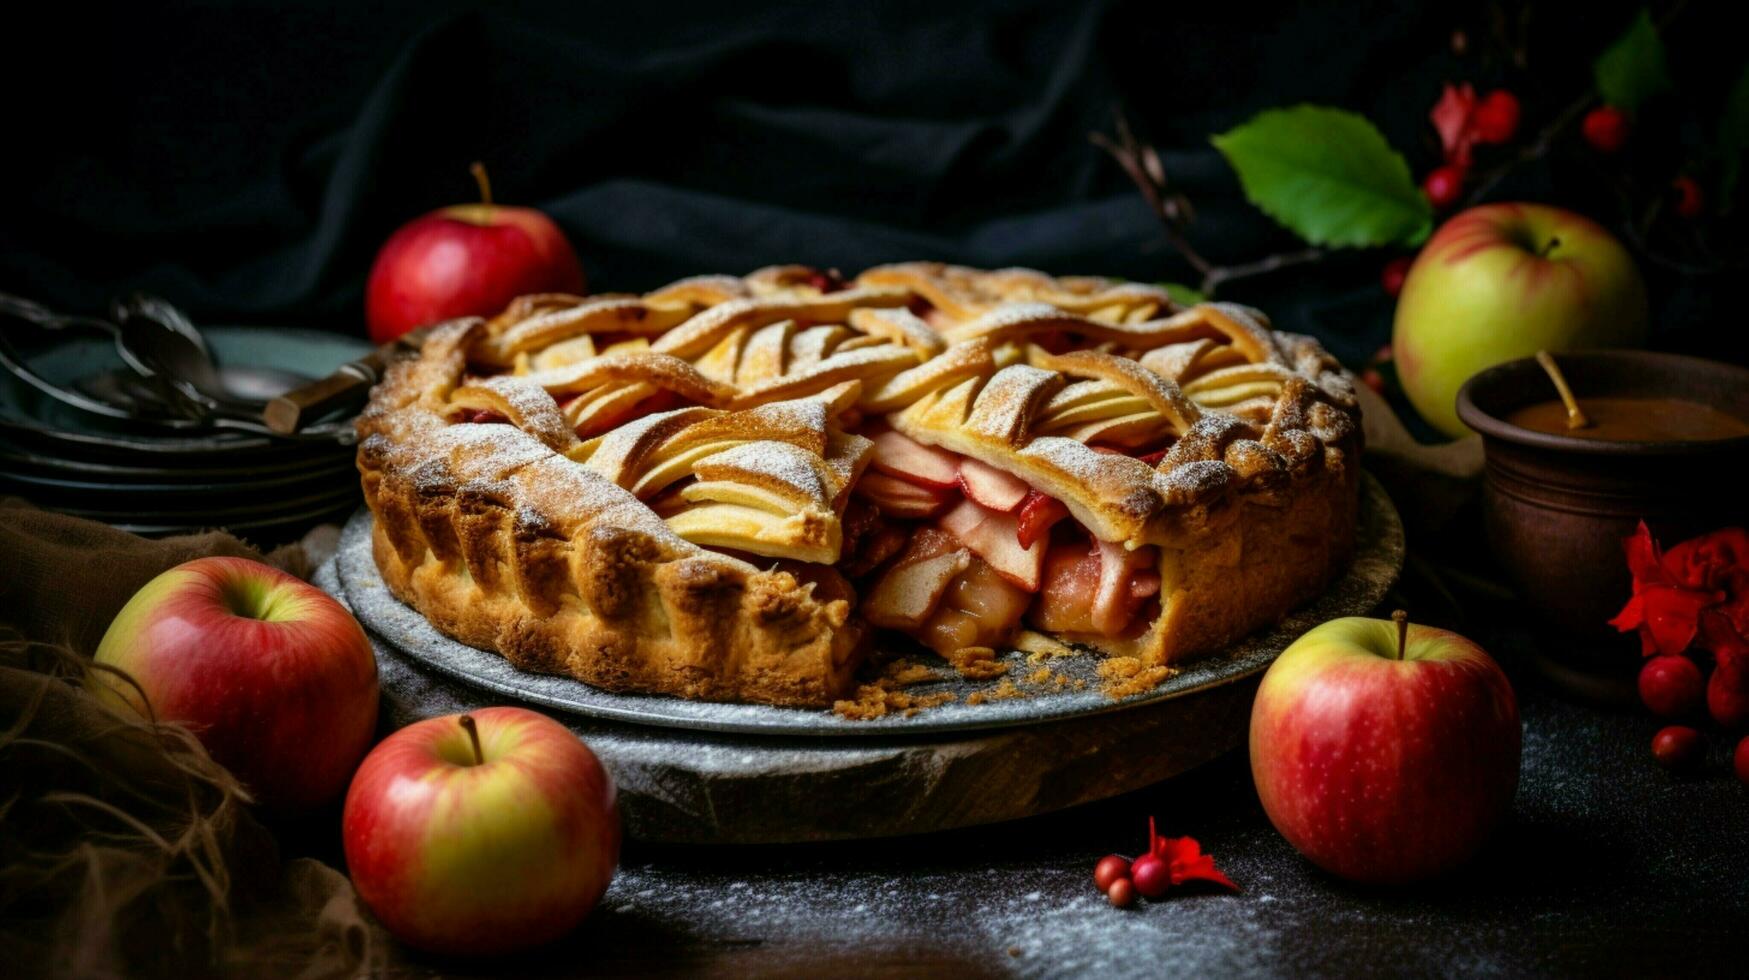 homemade apple pie baked with fresh fruit and rustic past photo